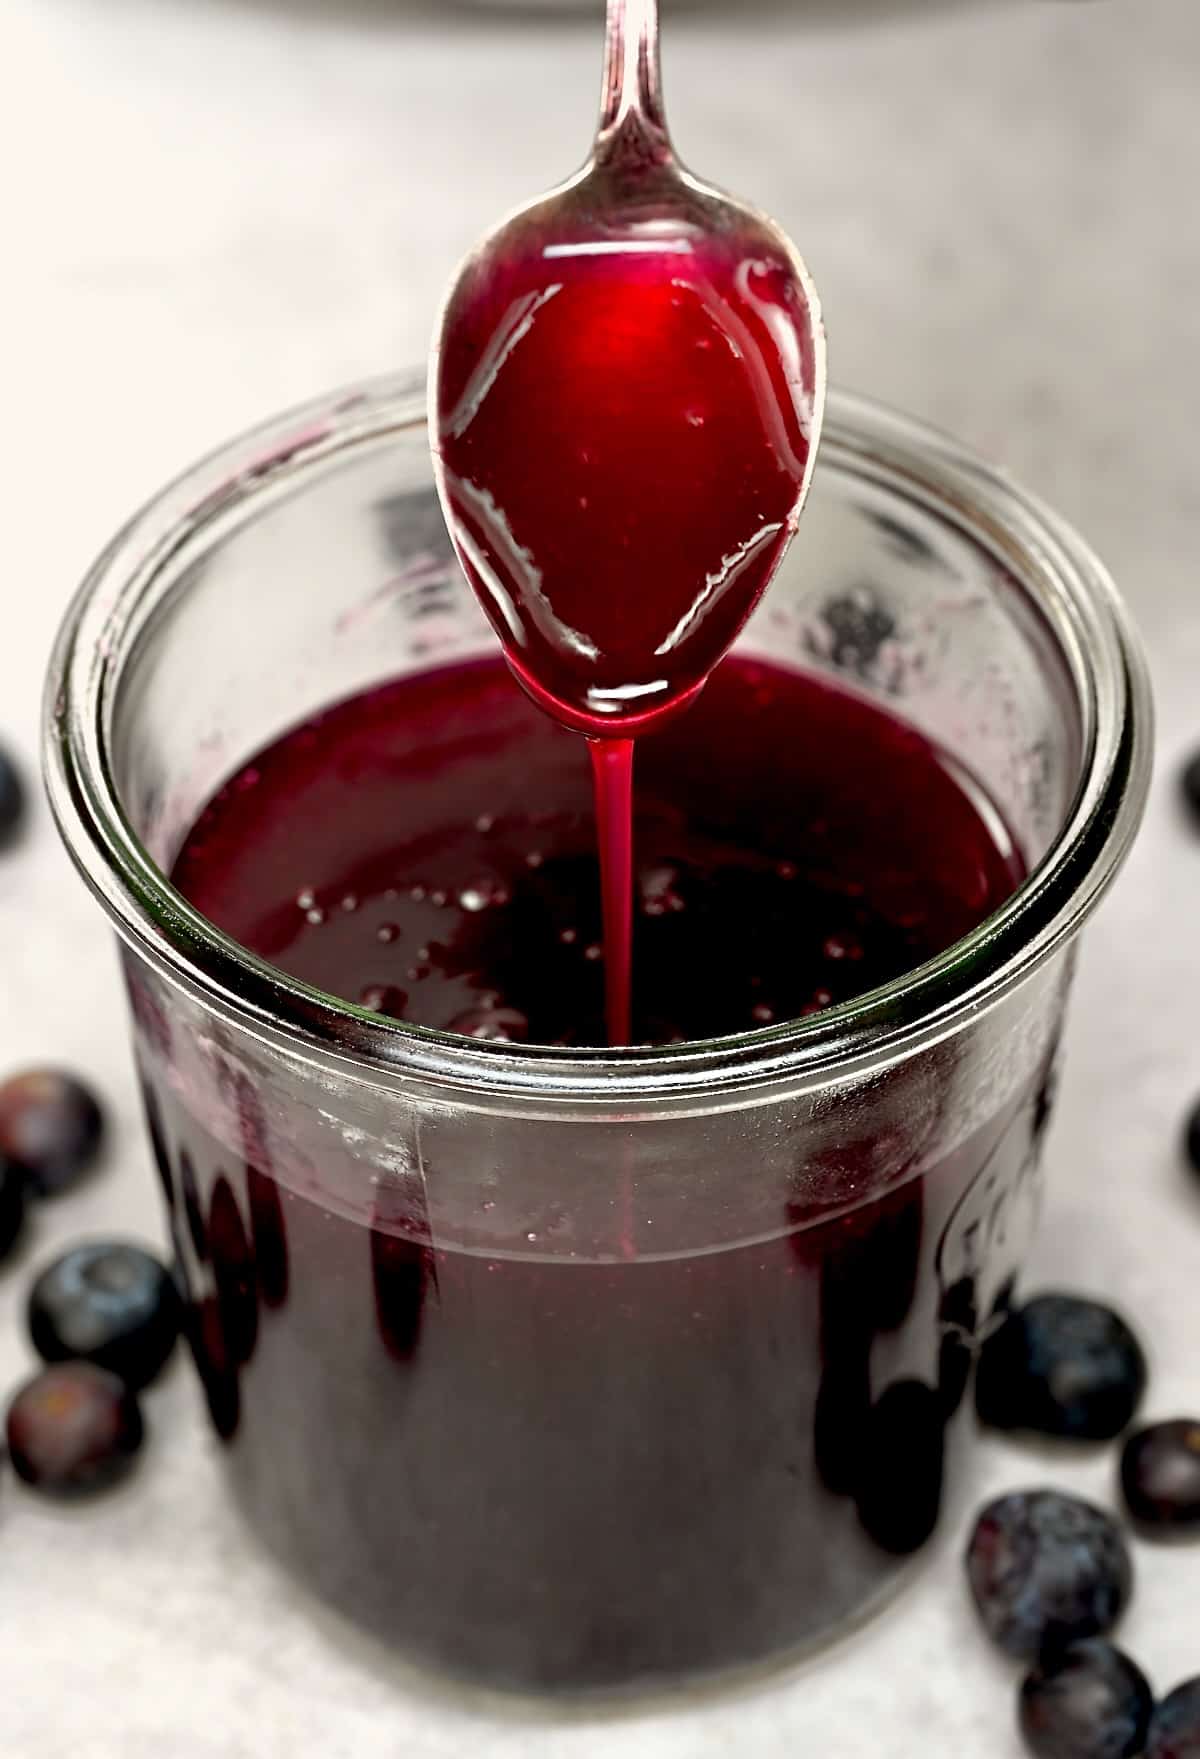 Spooning blueberry syrup over a small jar